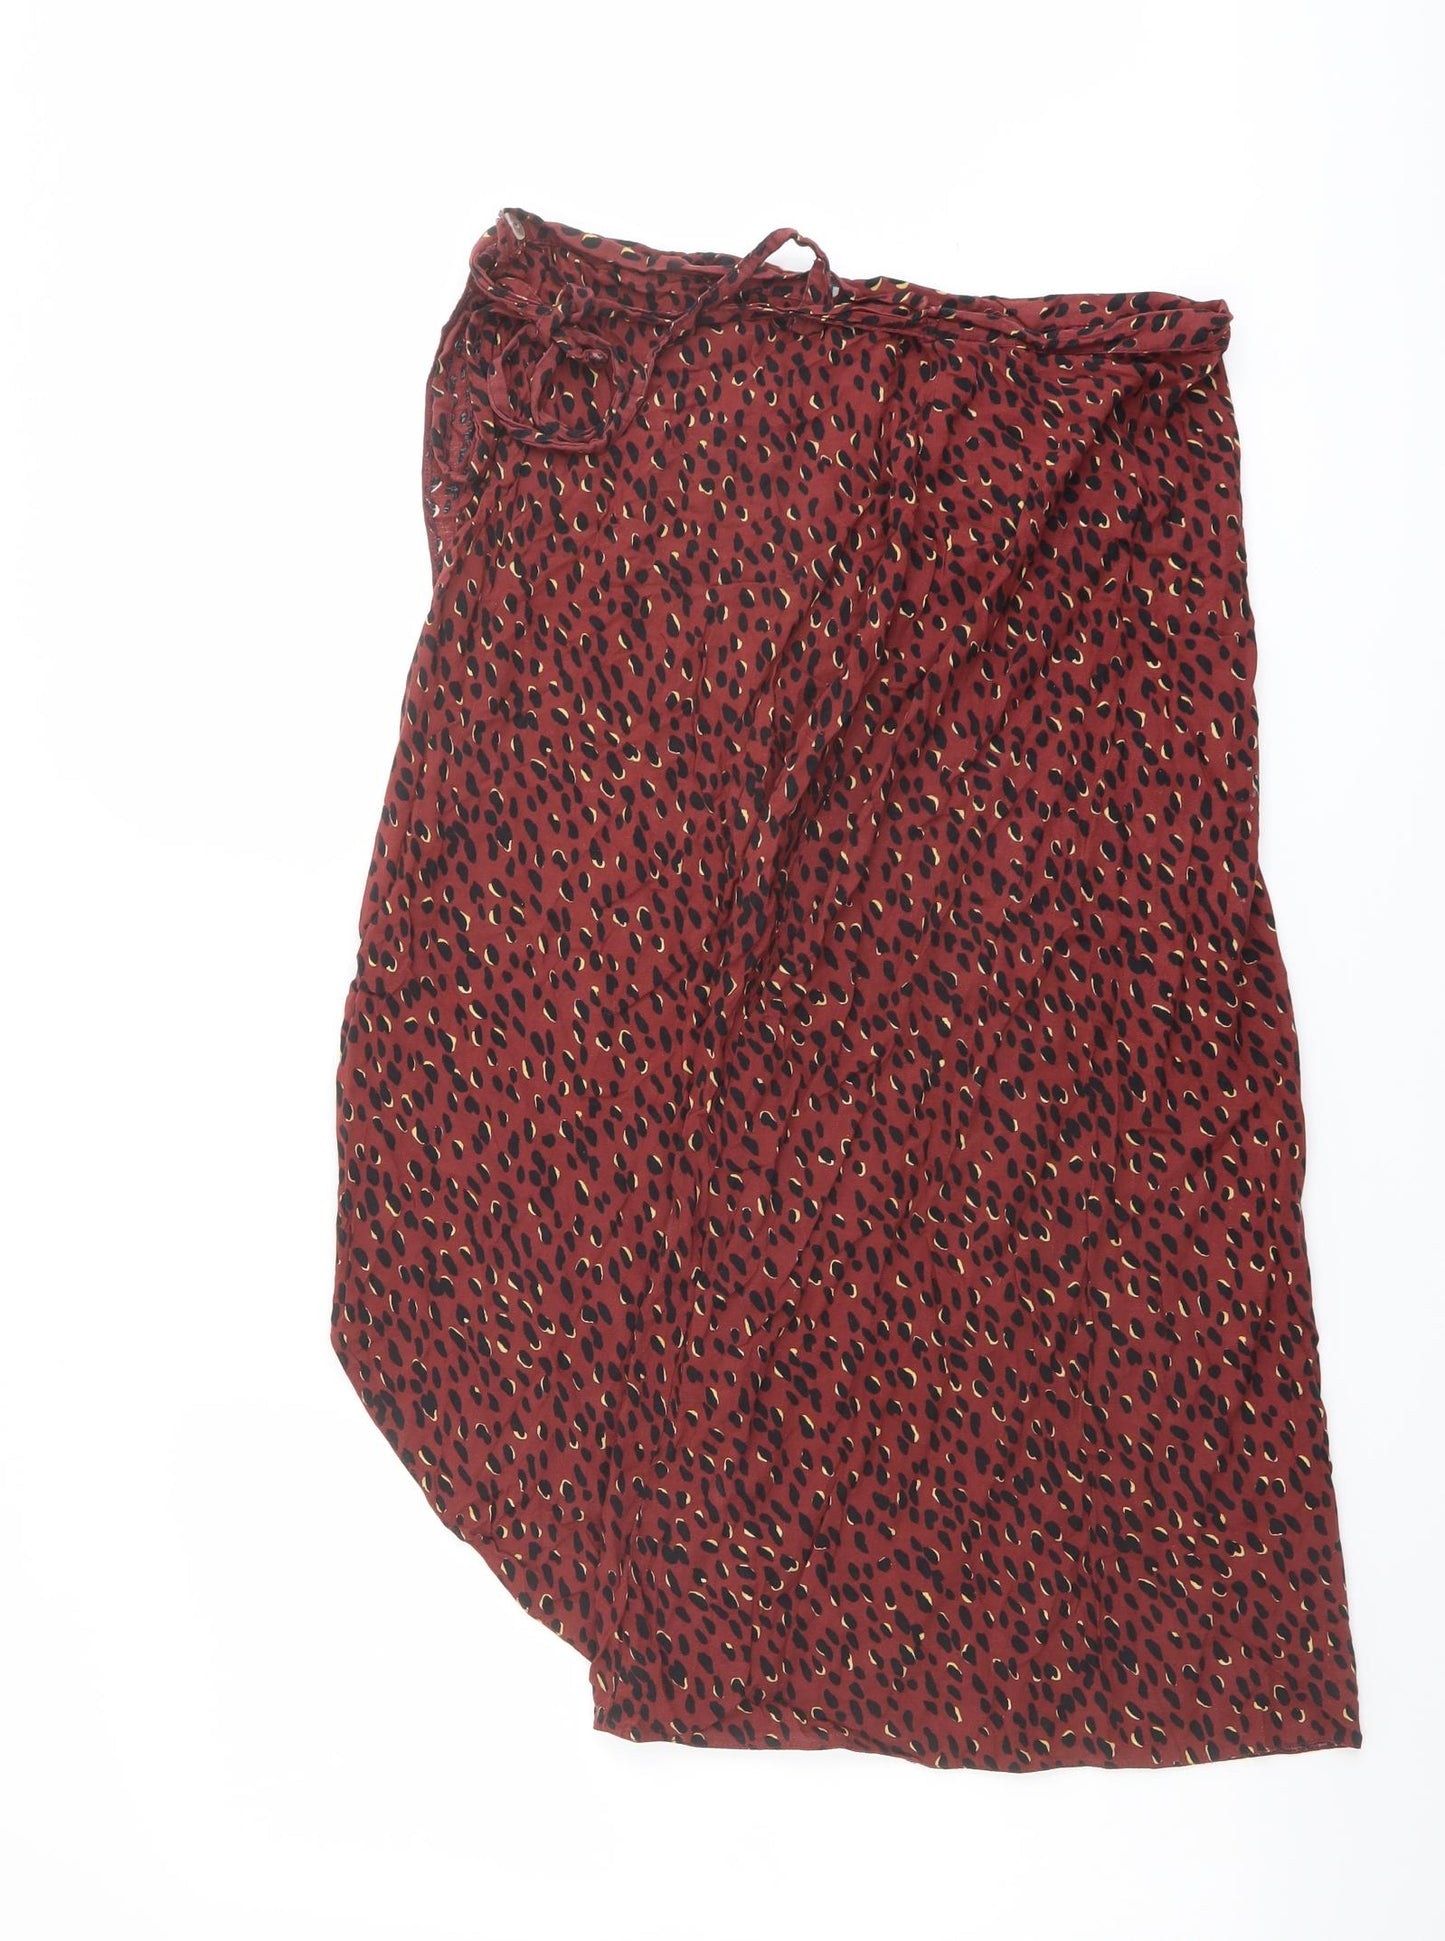 New Look Womens Red Animal Print Viscose Wrap Skirt Size 6 Tie - Leopard pattern